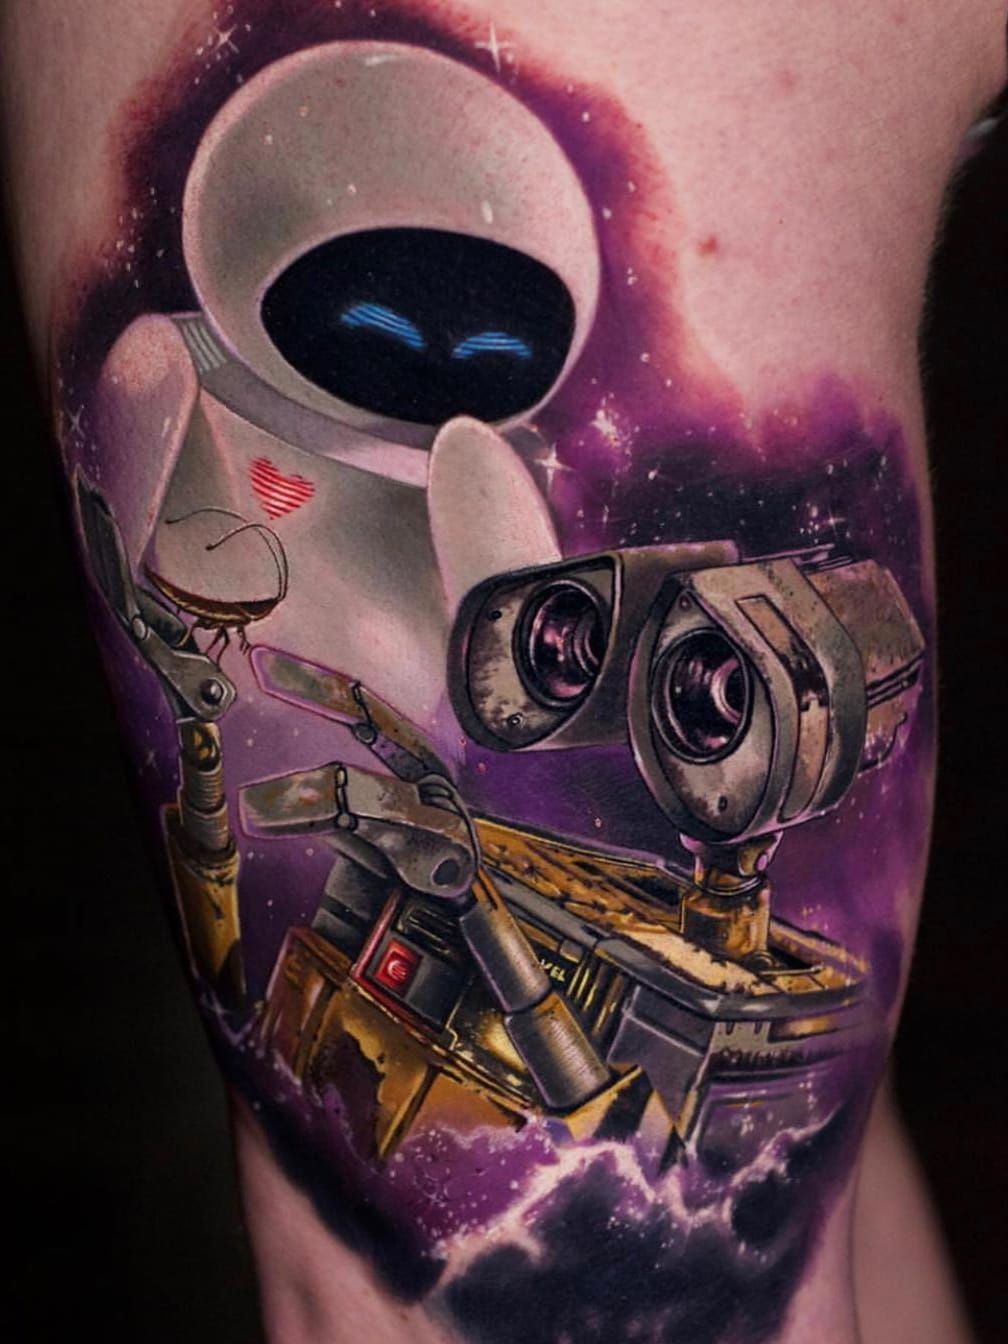 Walle tattoo  Walle tattoo added to back piece  queenofnancyland   Flickr